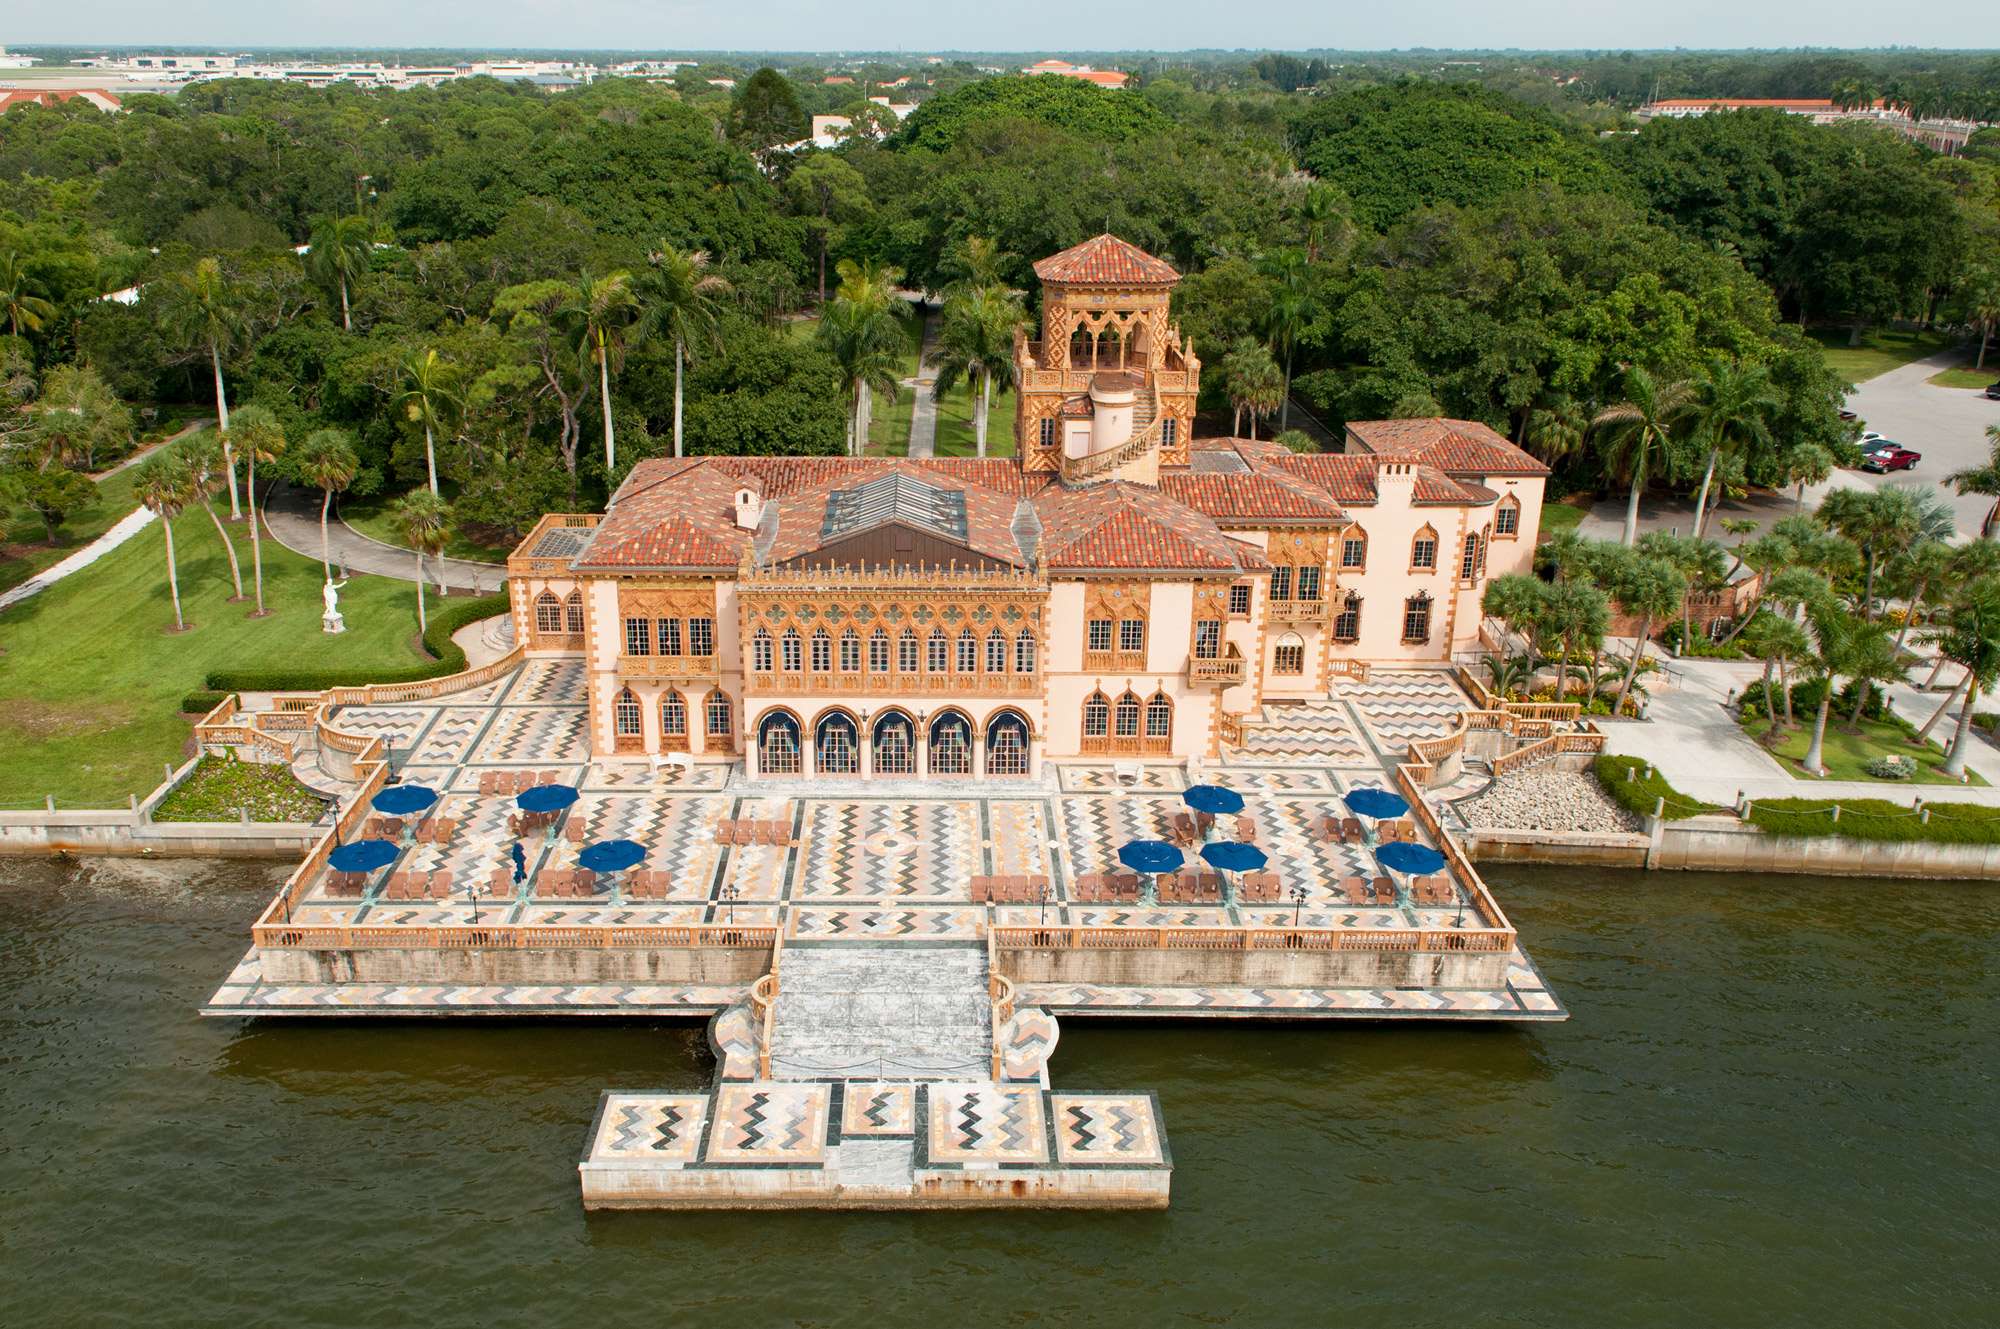 Ringling's Сà d'Zan - view from above